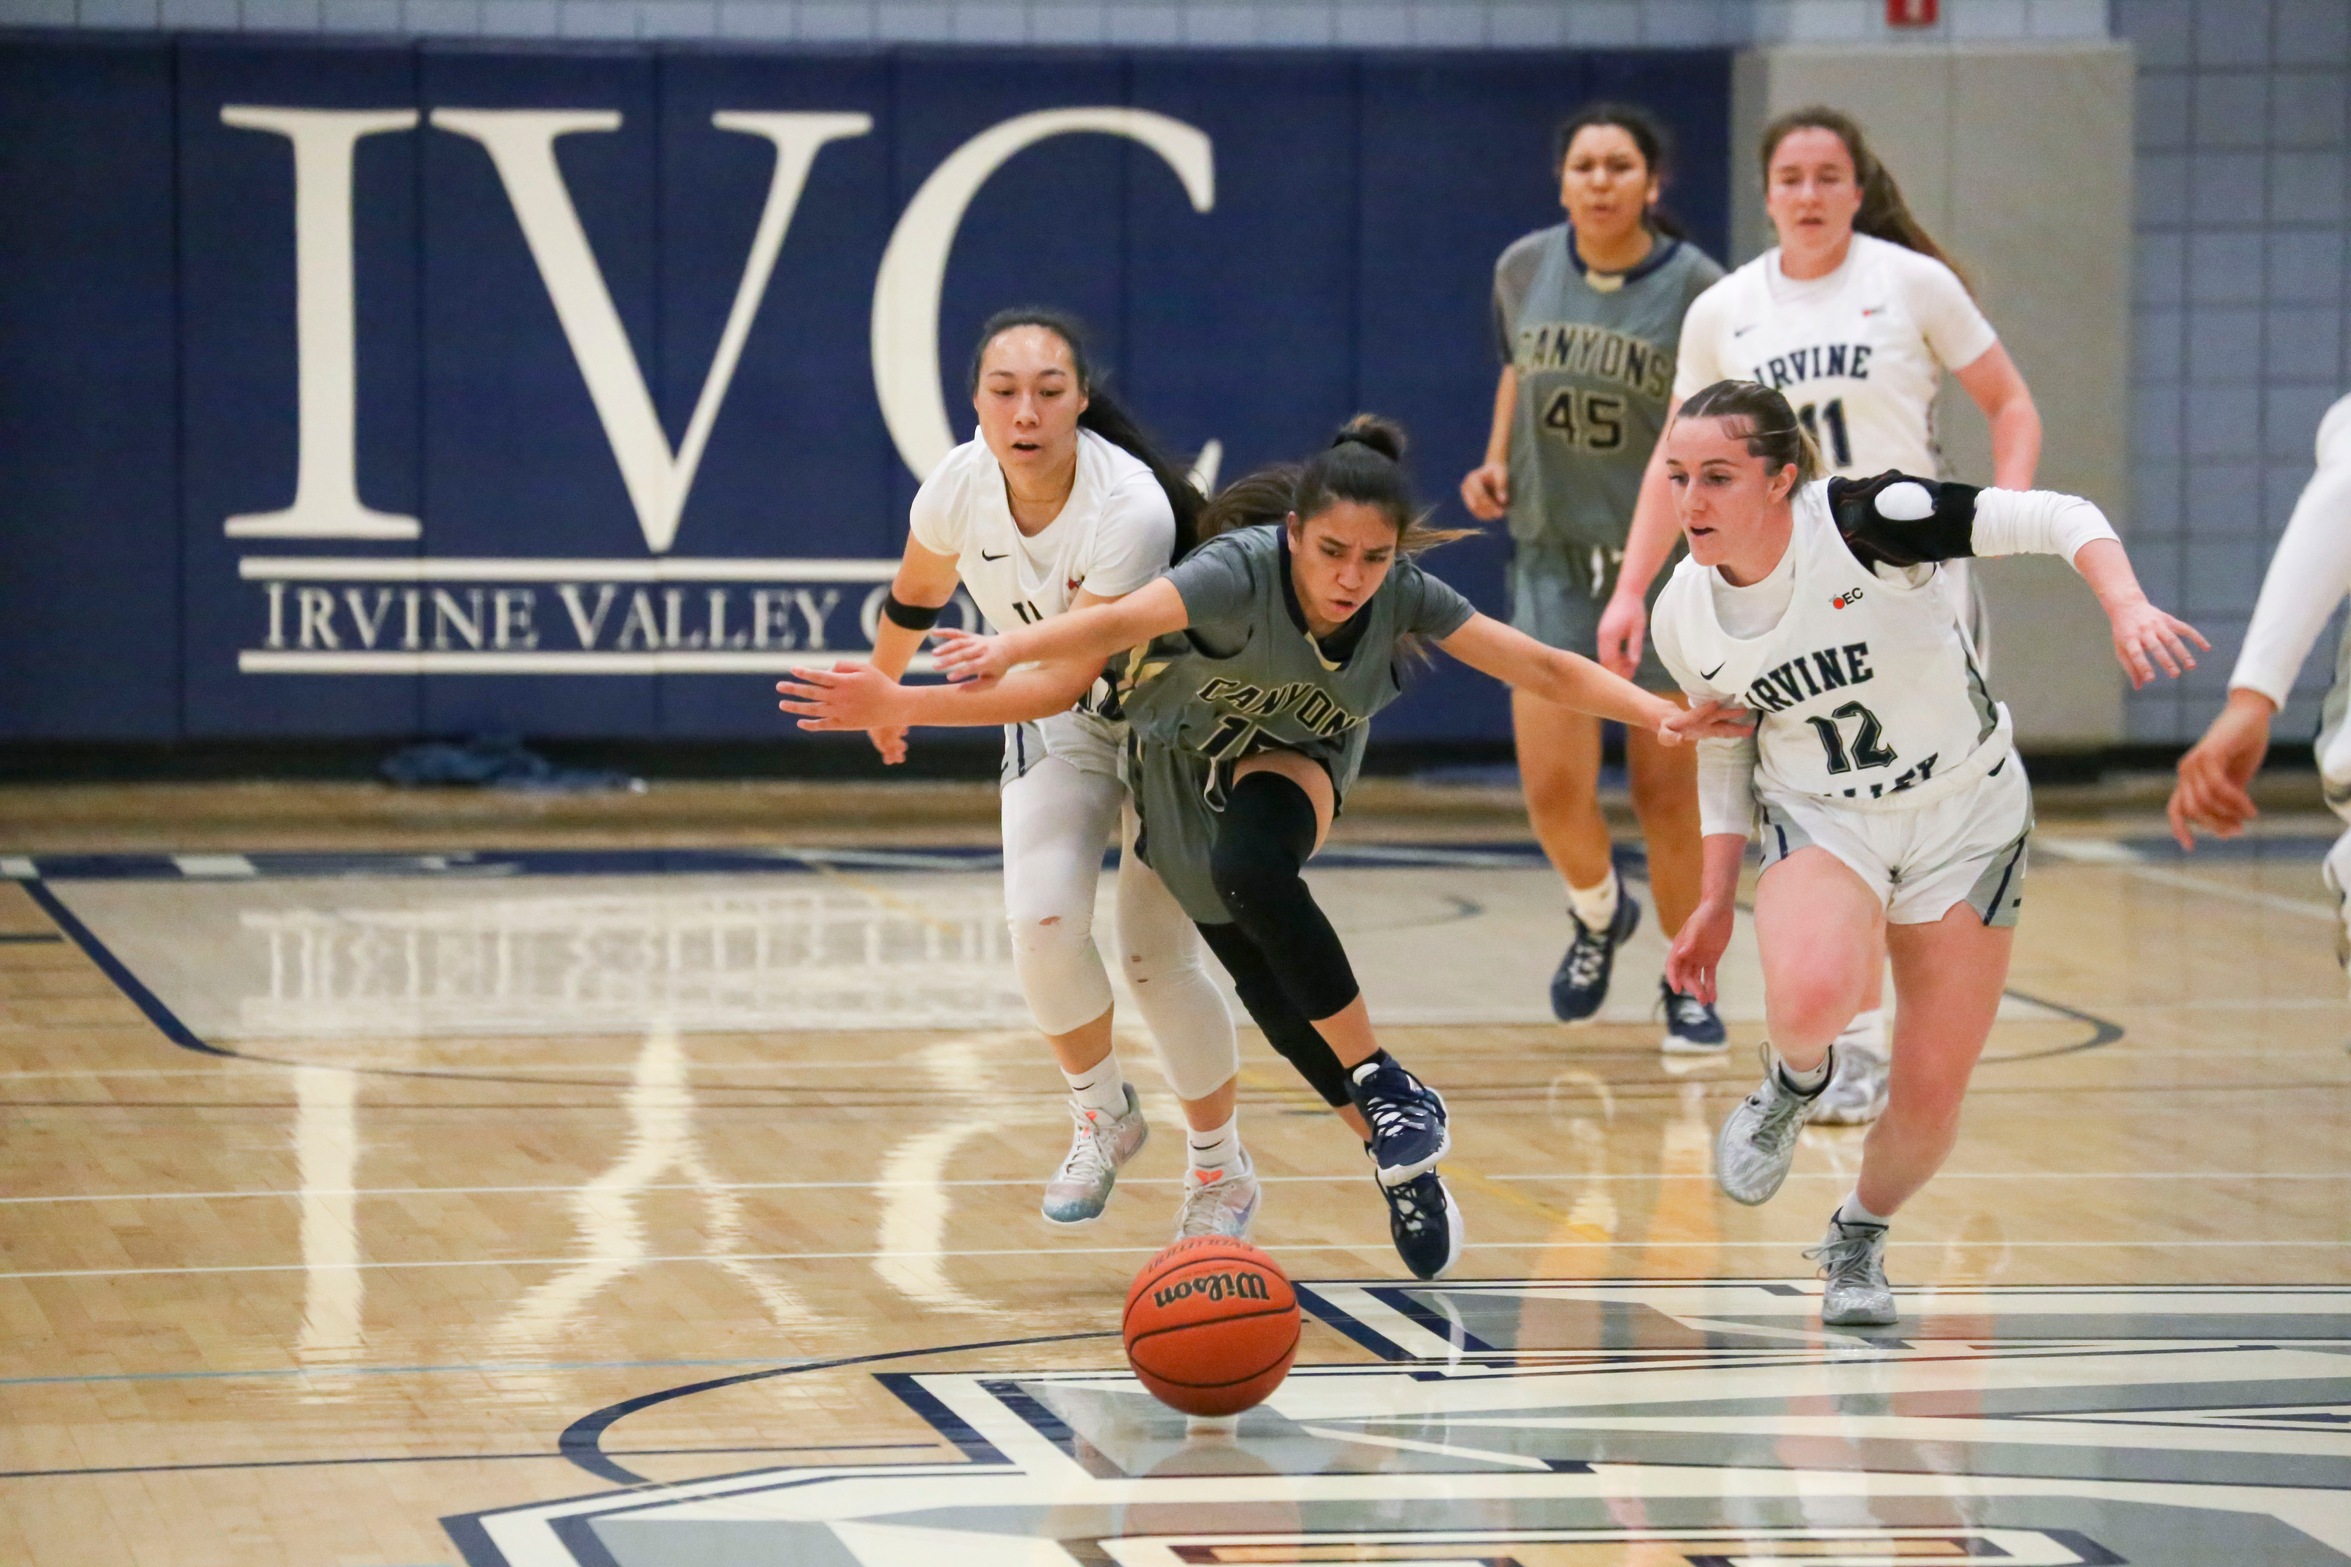 College of the Canyons women's basketball vs. Irvine Valley College on March 5, 2022.